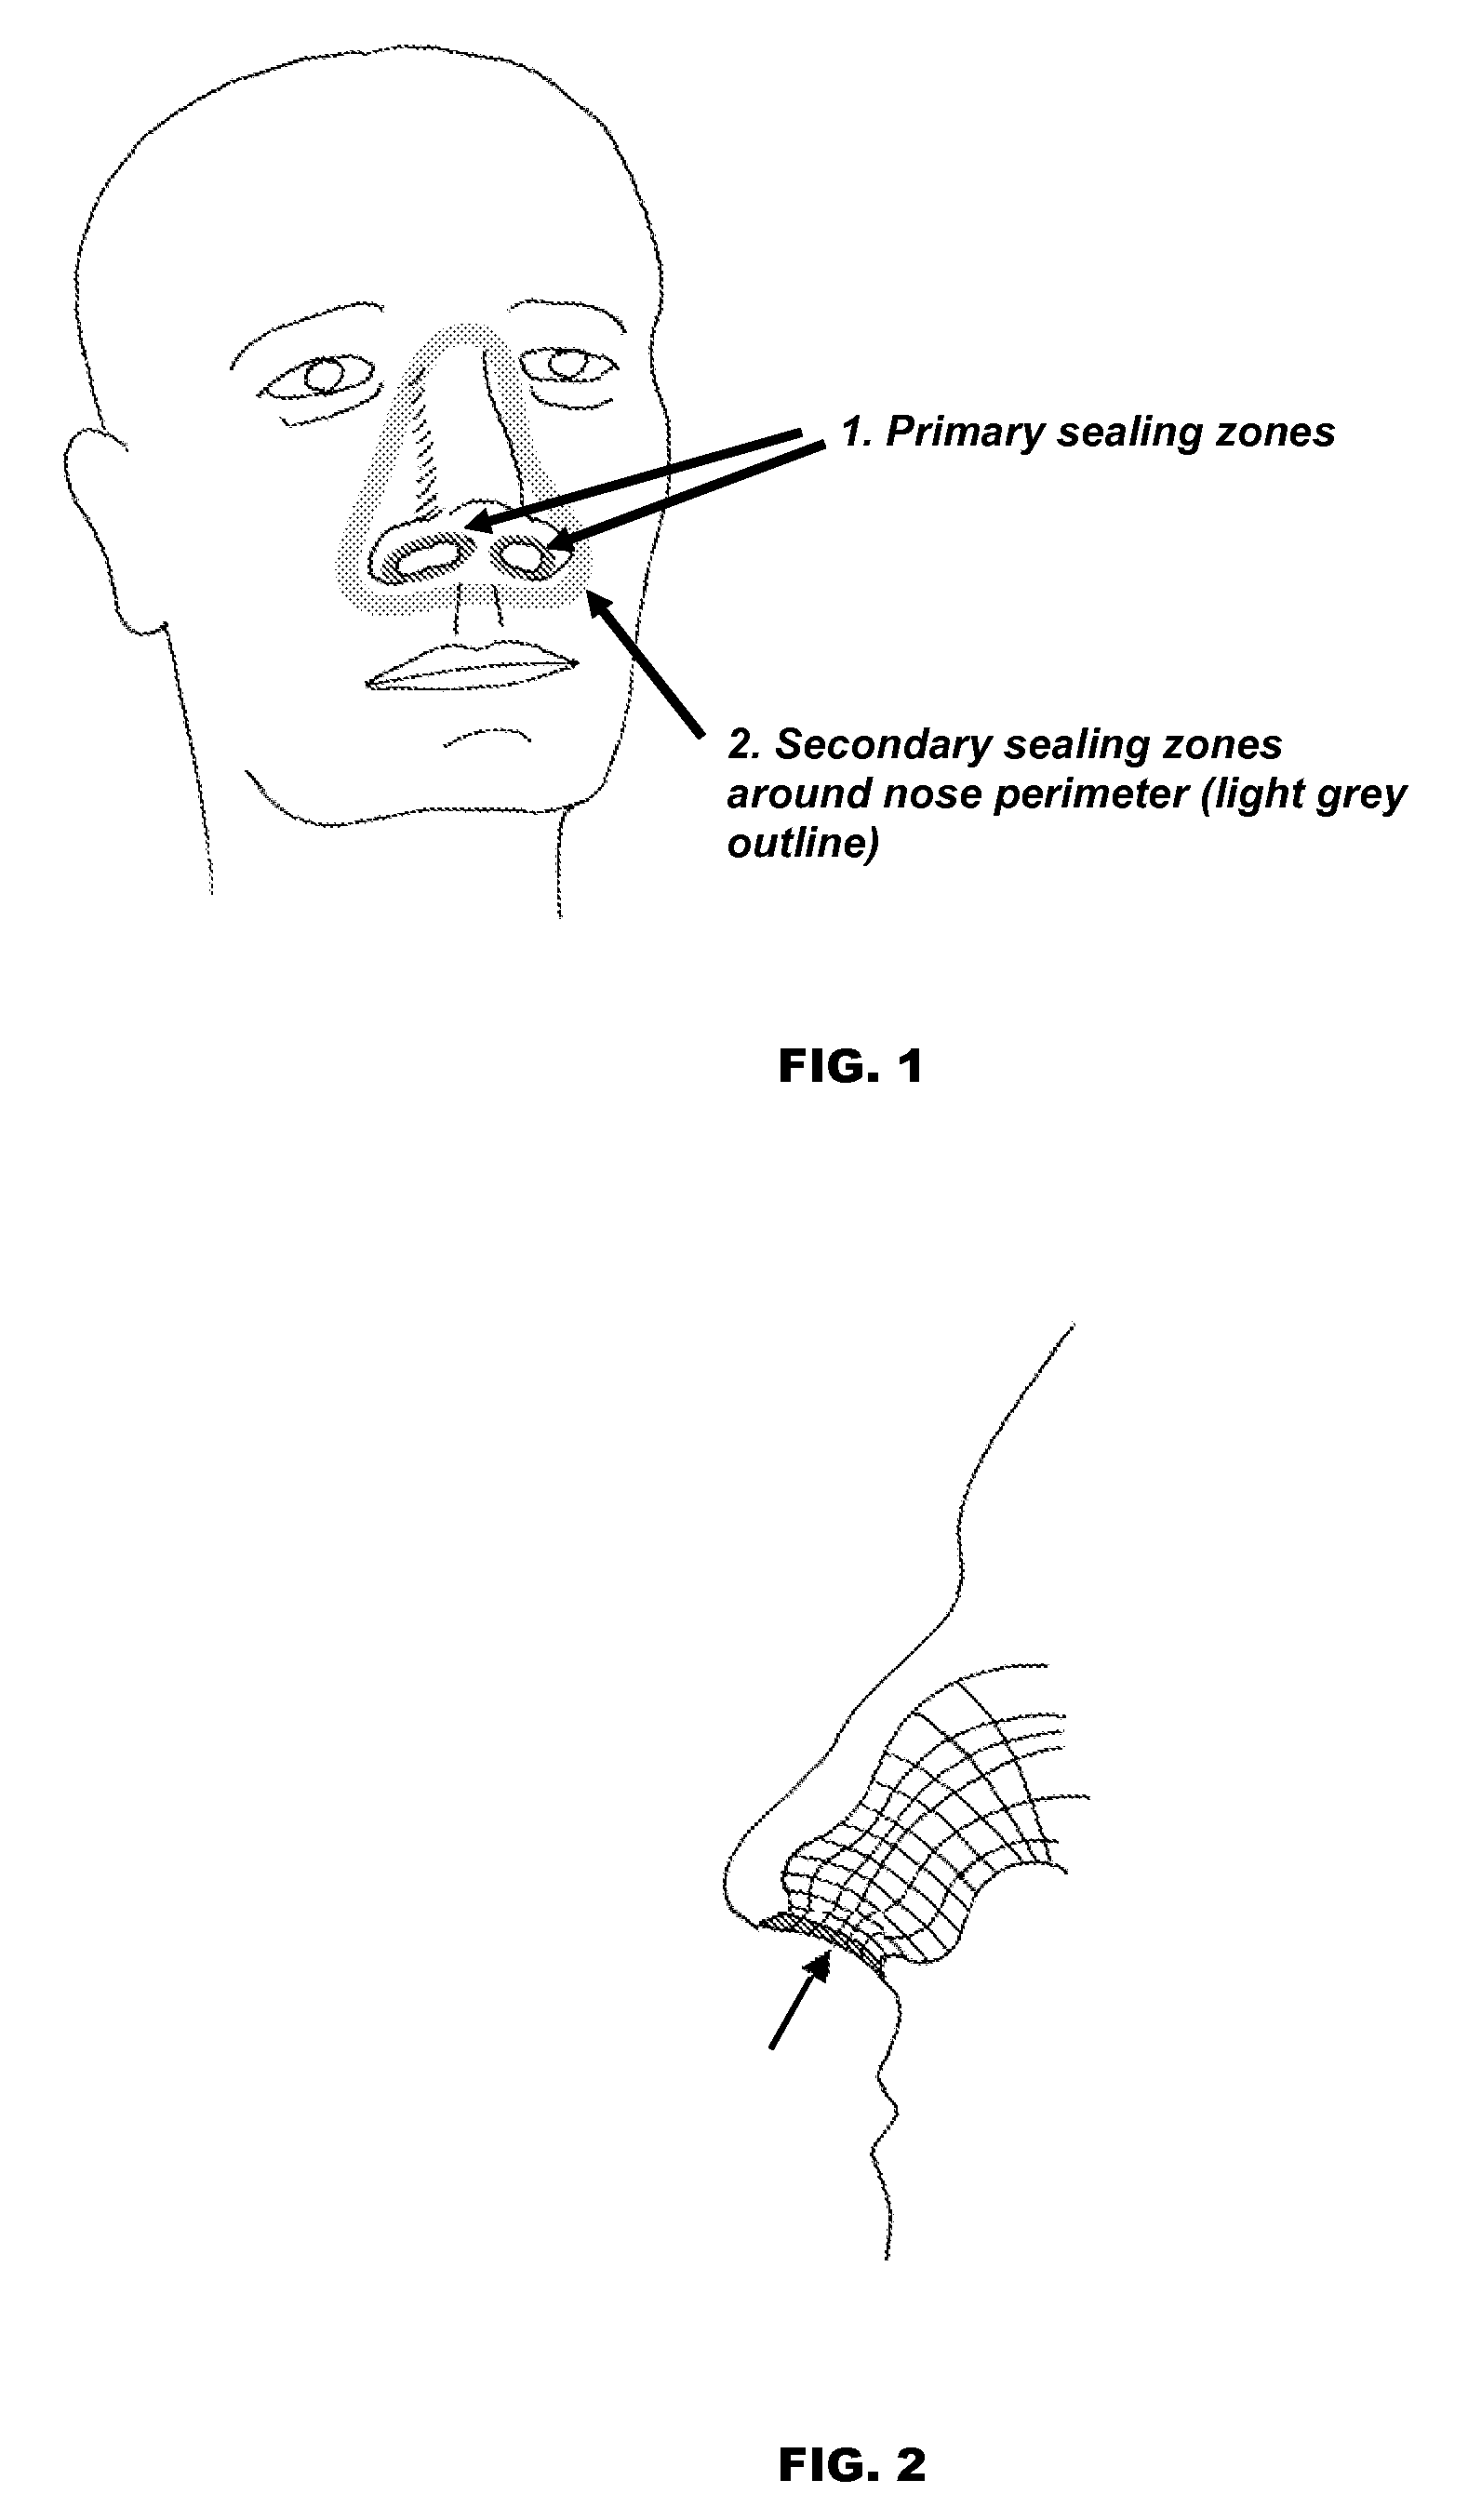 Mask System with Improved Sealing Properties for Administering Nasal Positive Airway Pressure Therapy